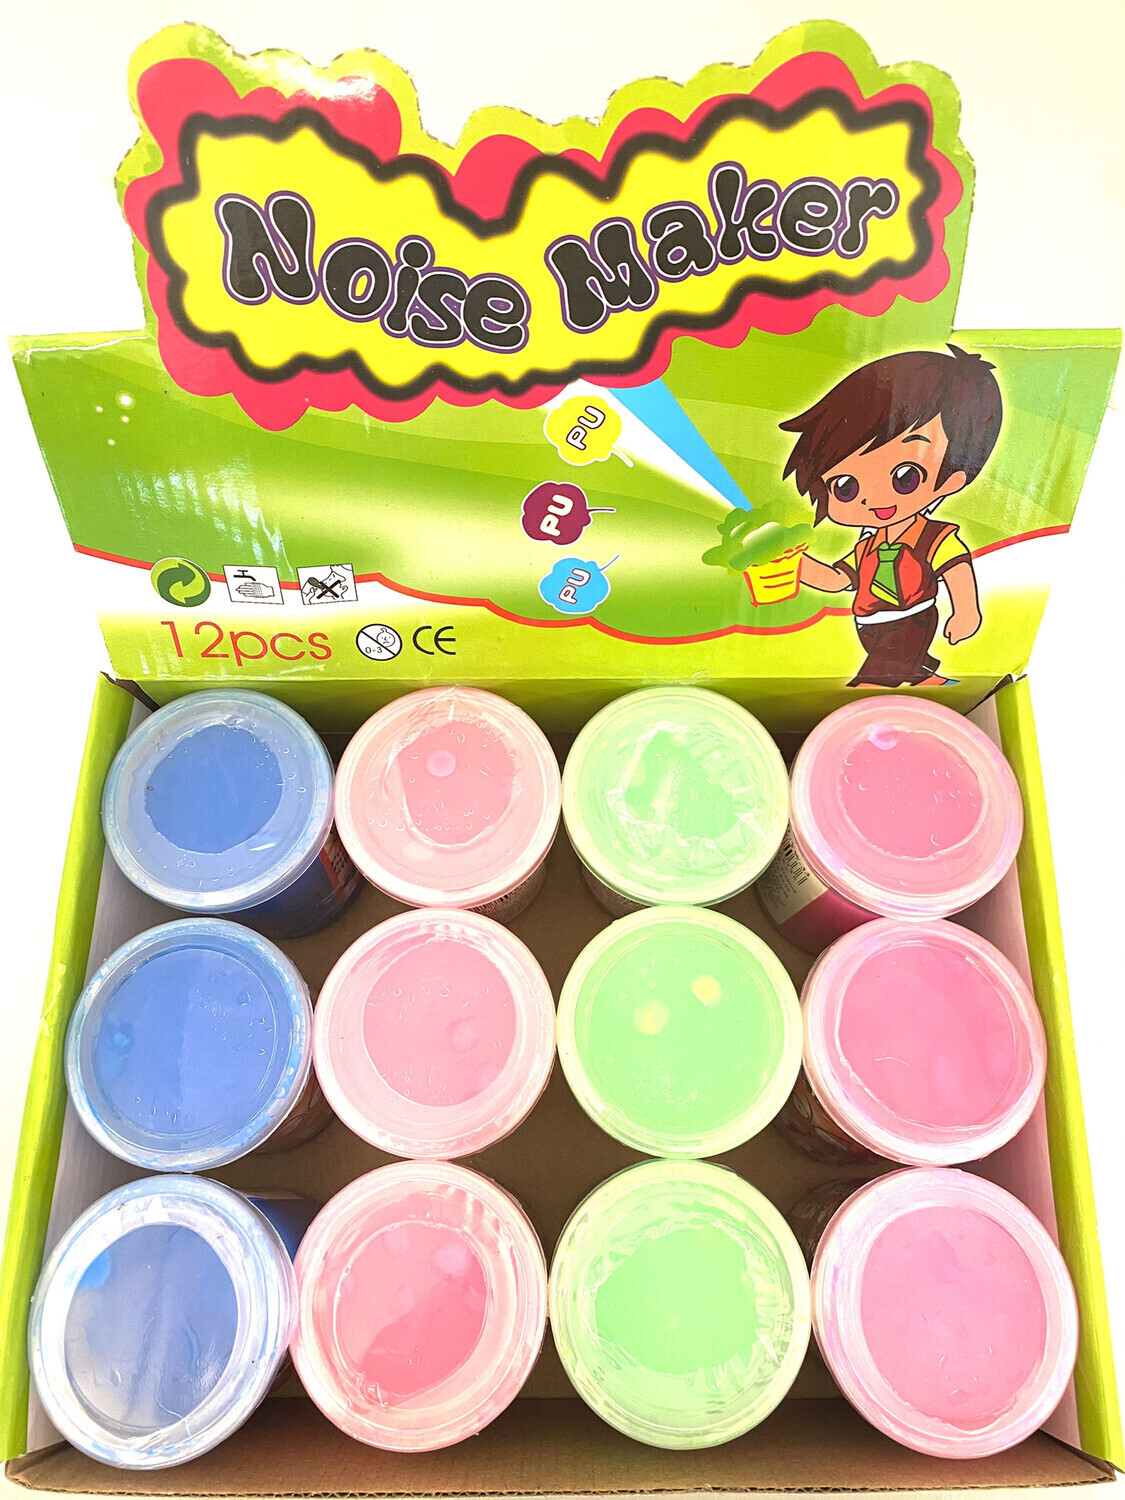 $1.99 TOY MIX /  NOISE MAKER SLIME / P-7001 - YW-33